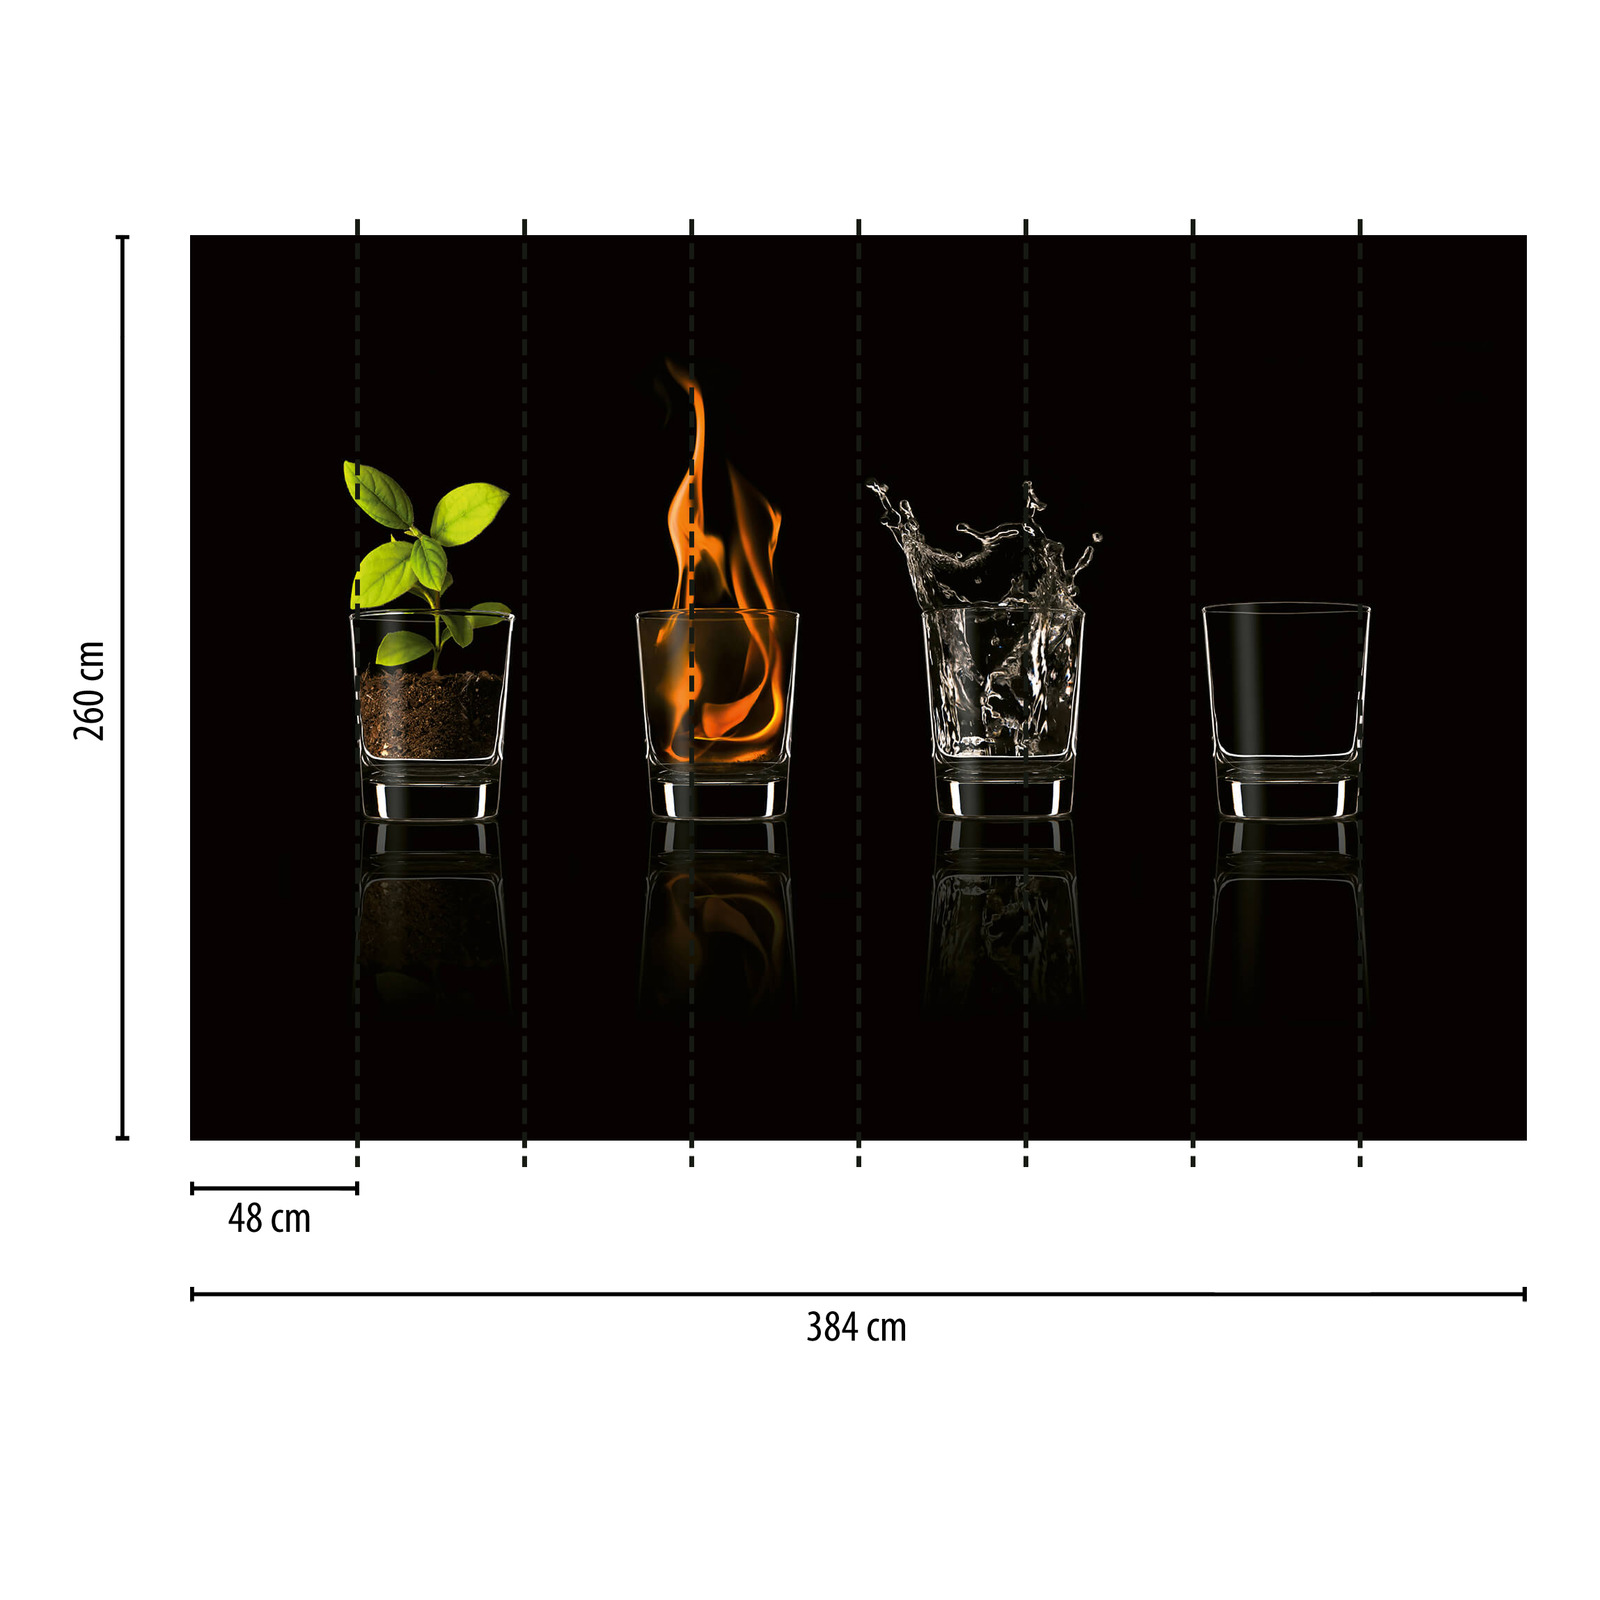             Photo wallpaper glasses with four elements - black
        